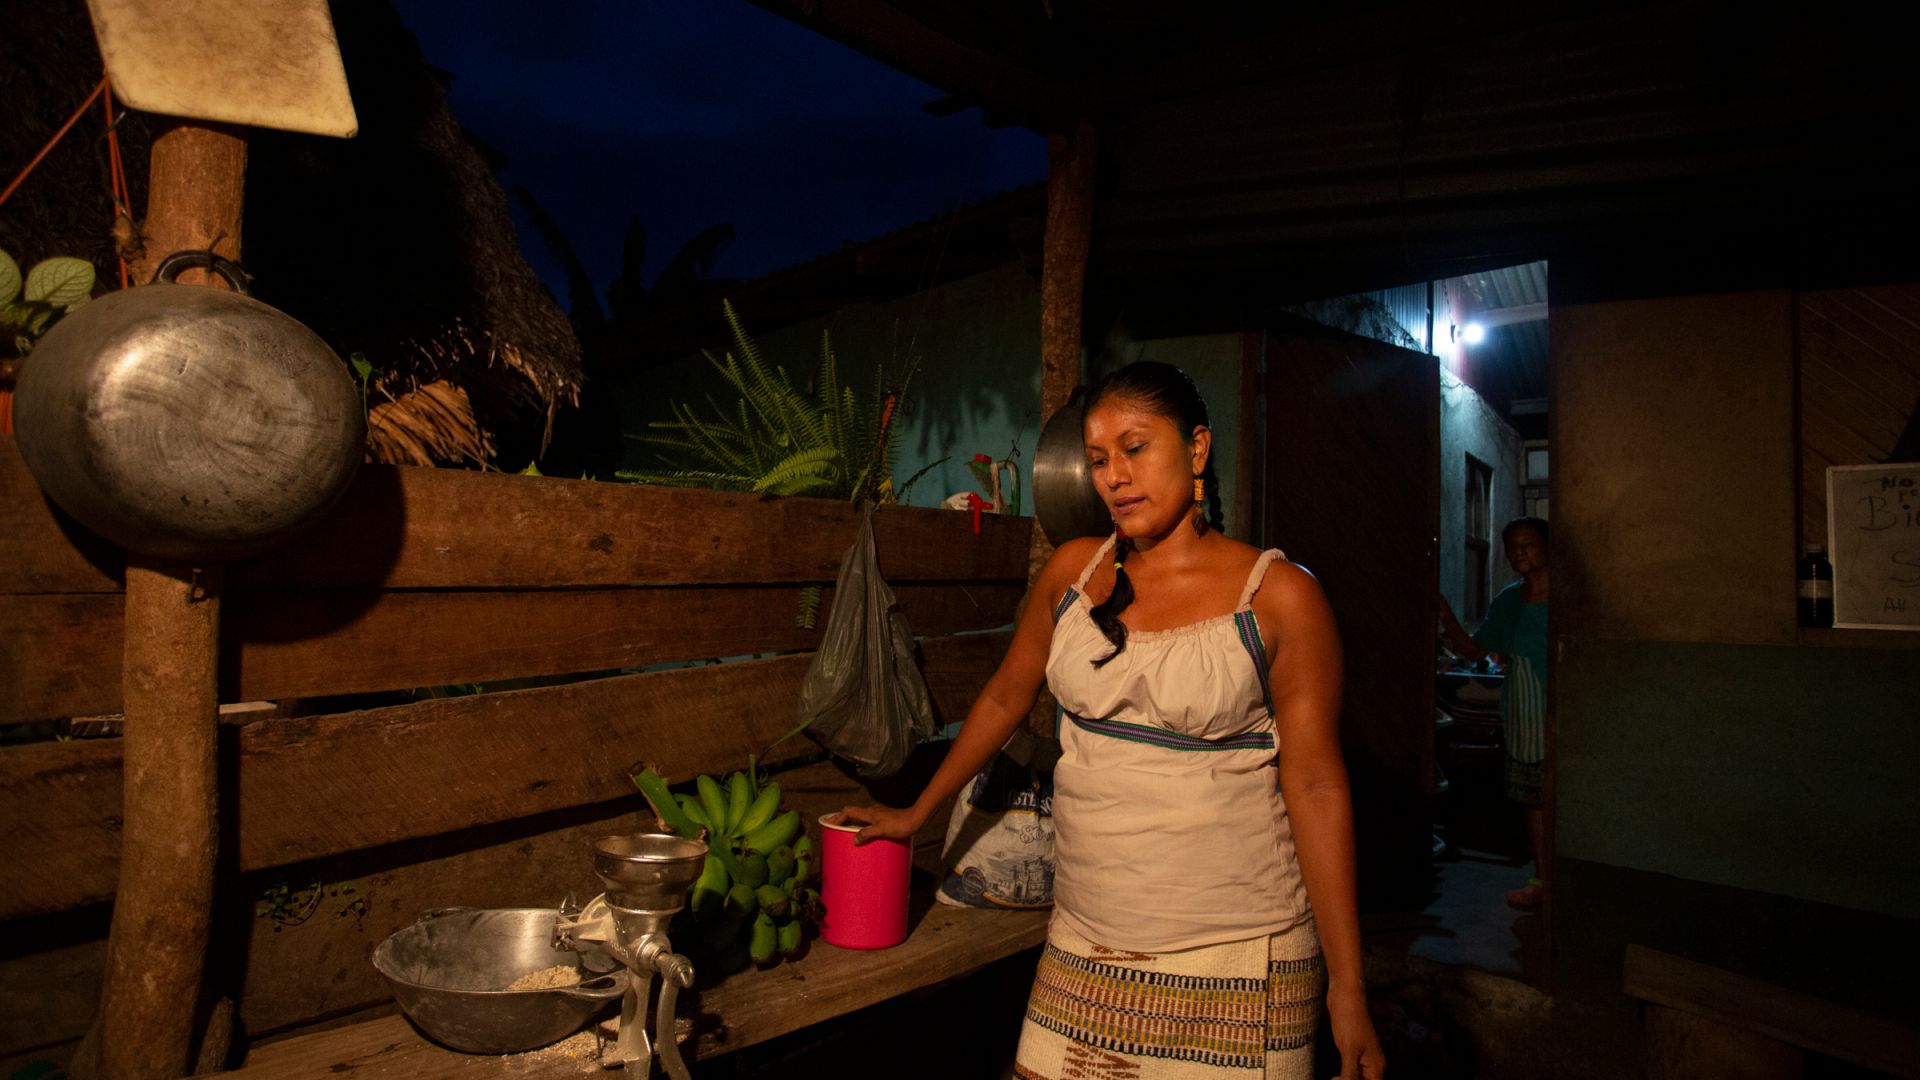 A photo of Cecilia Leyva, 35, leaning on a wooden table with a woman standing in the back near an open door.